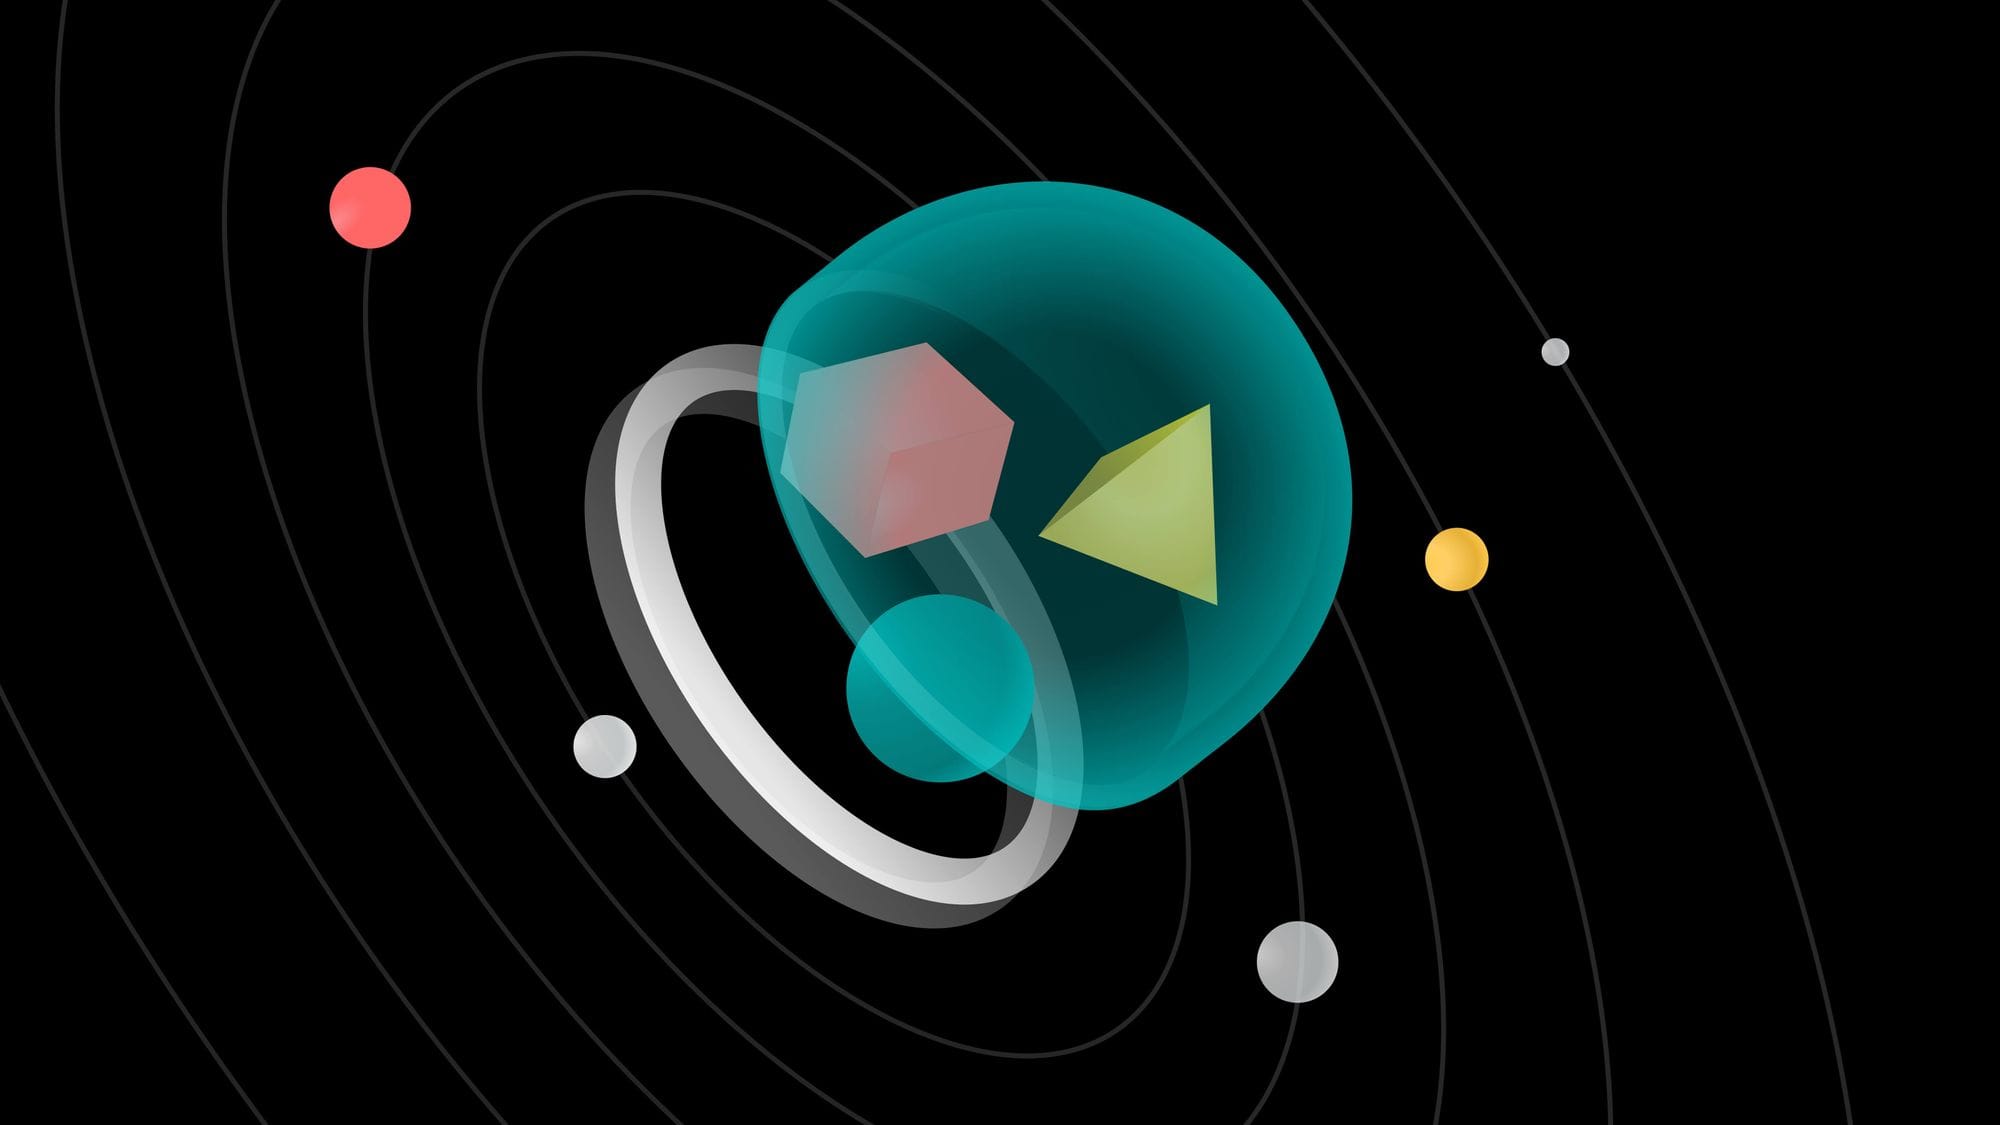 Stylized celestial body representation with colorful geometric shapes on a black background with orbital lines